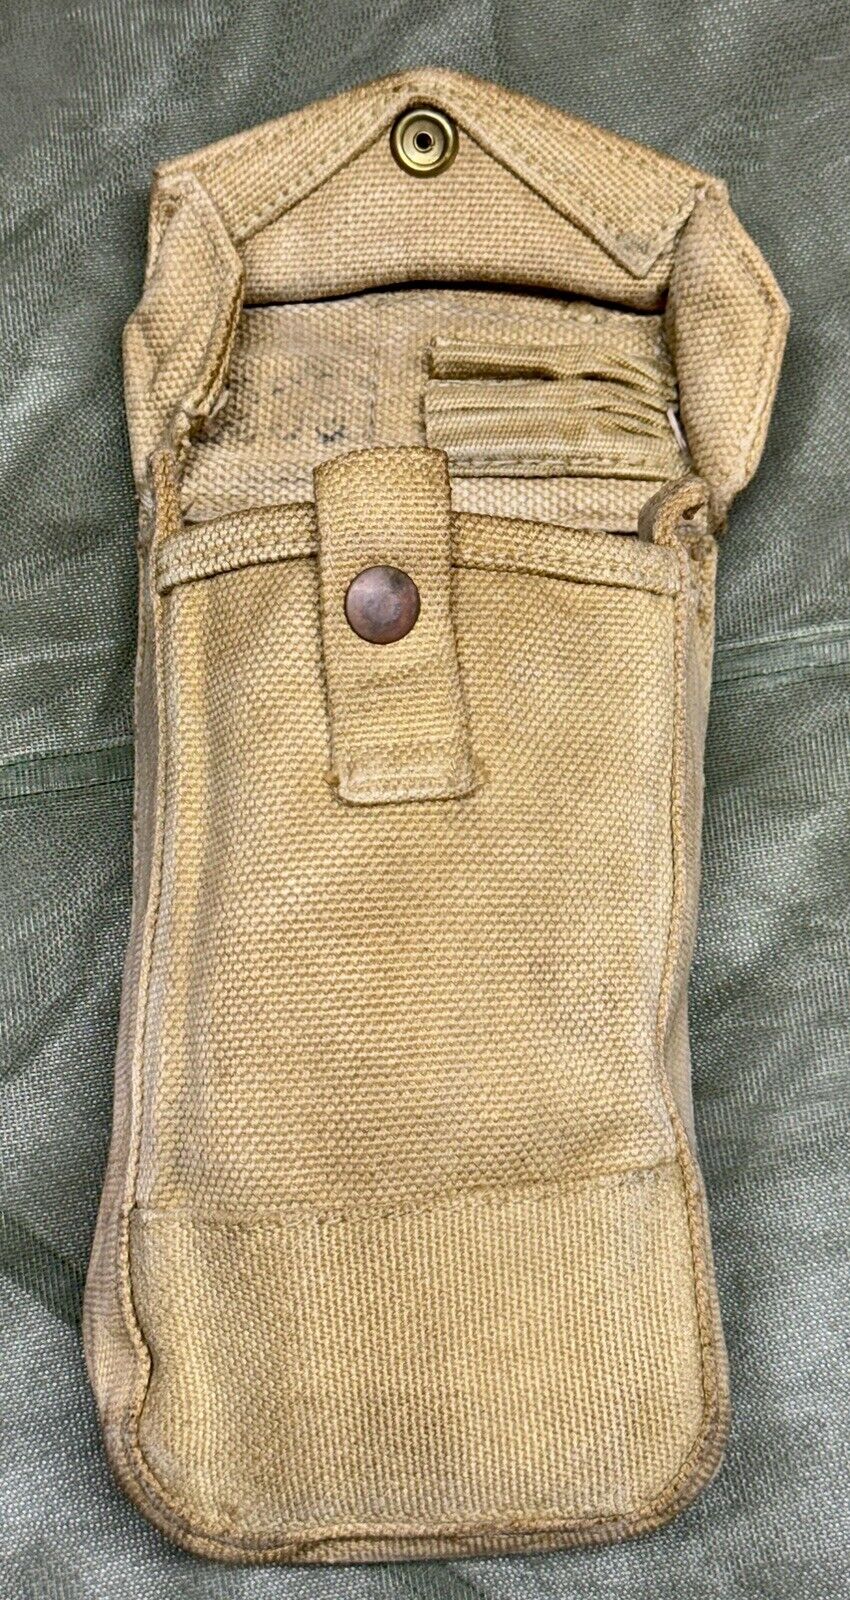 Early WWII British Pattern 1937 / P37 Single Ammo Pouch - Marked